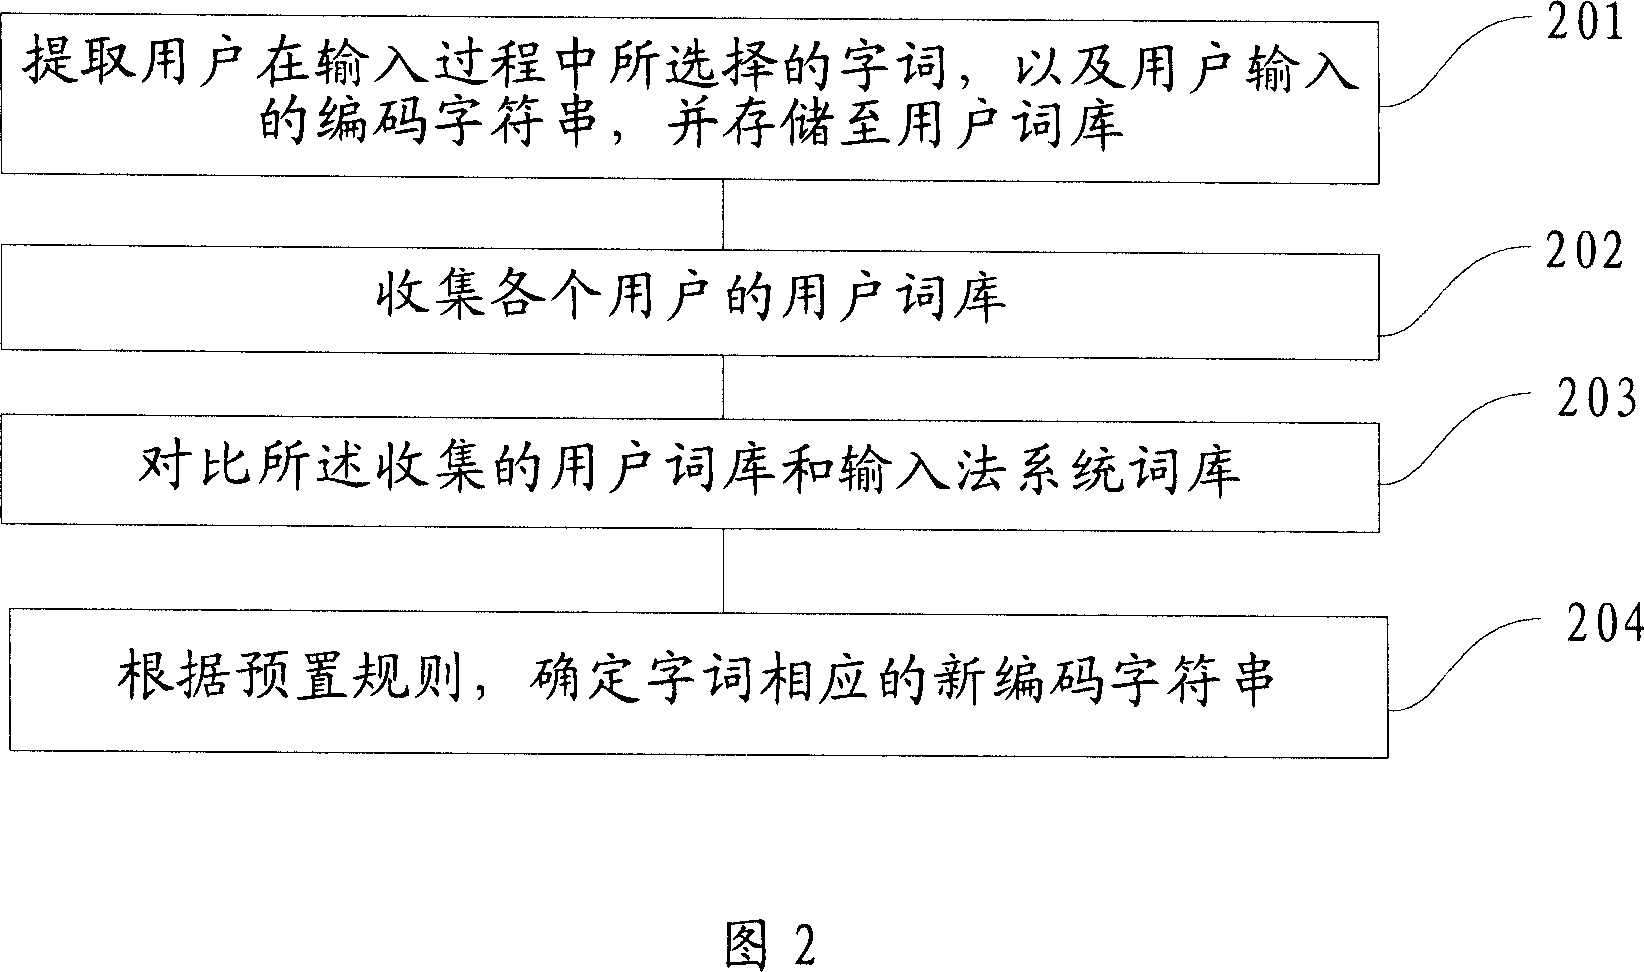 Method for obtaining newly encoded character string, input method system and word stock generation device